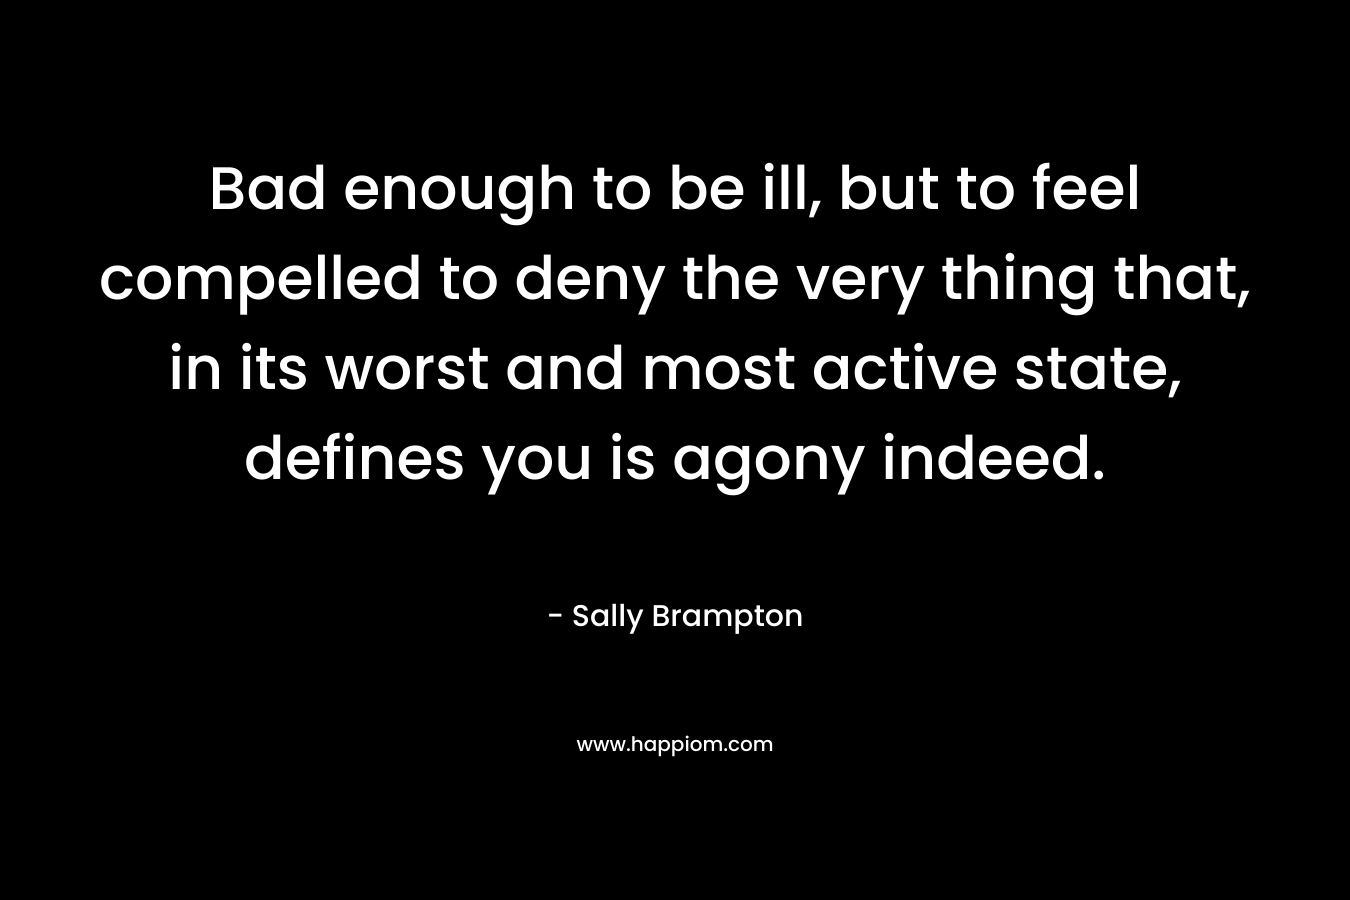 Bad enough to be ill, but to feel compelled to deny the very thing that, in its worst and most active state, defines you is agony indeed.